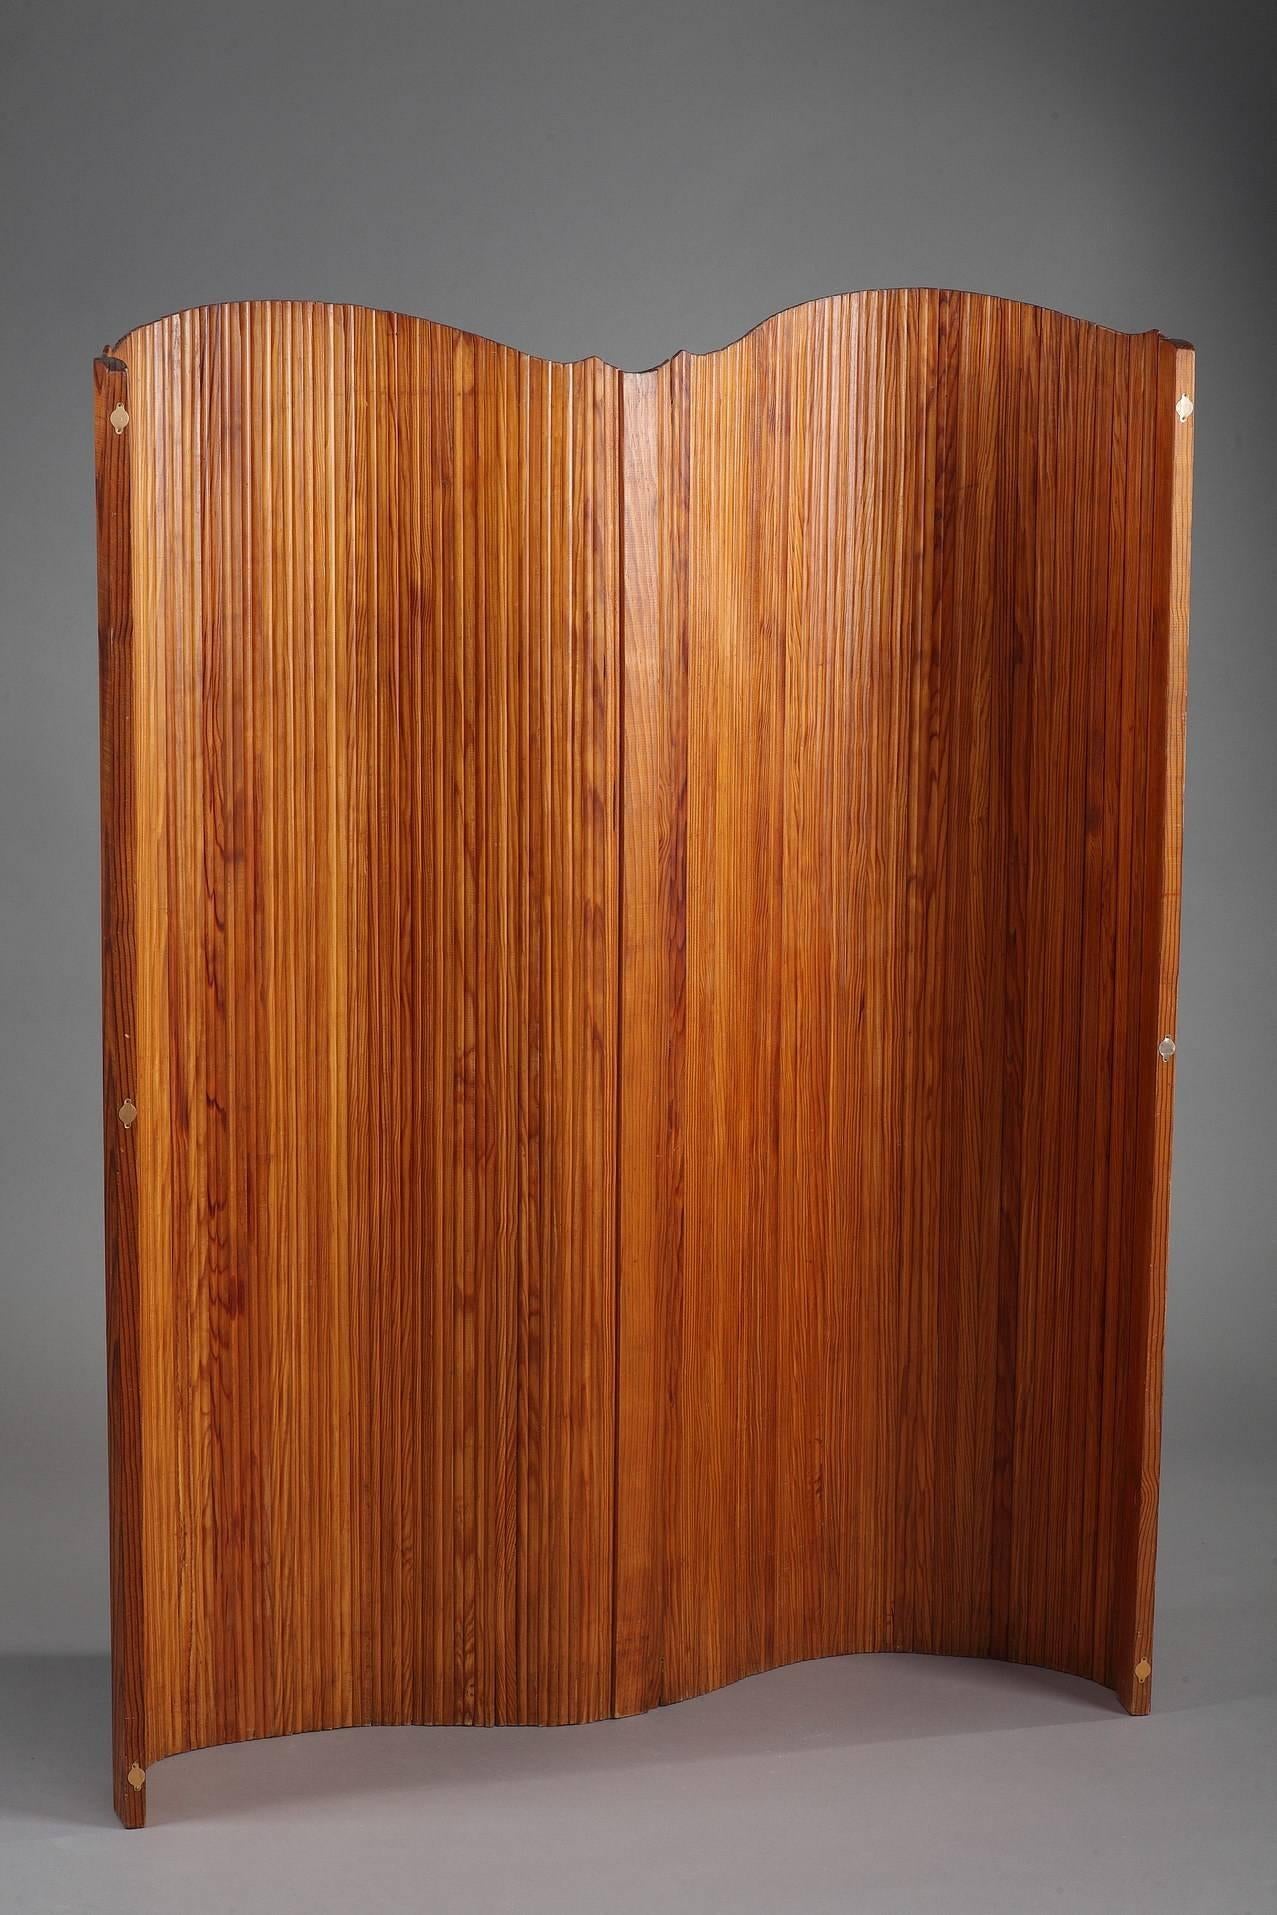 Wood Mid-20th Century Articulated Screen by Baumann, 1950s